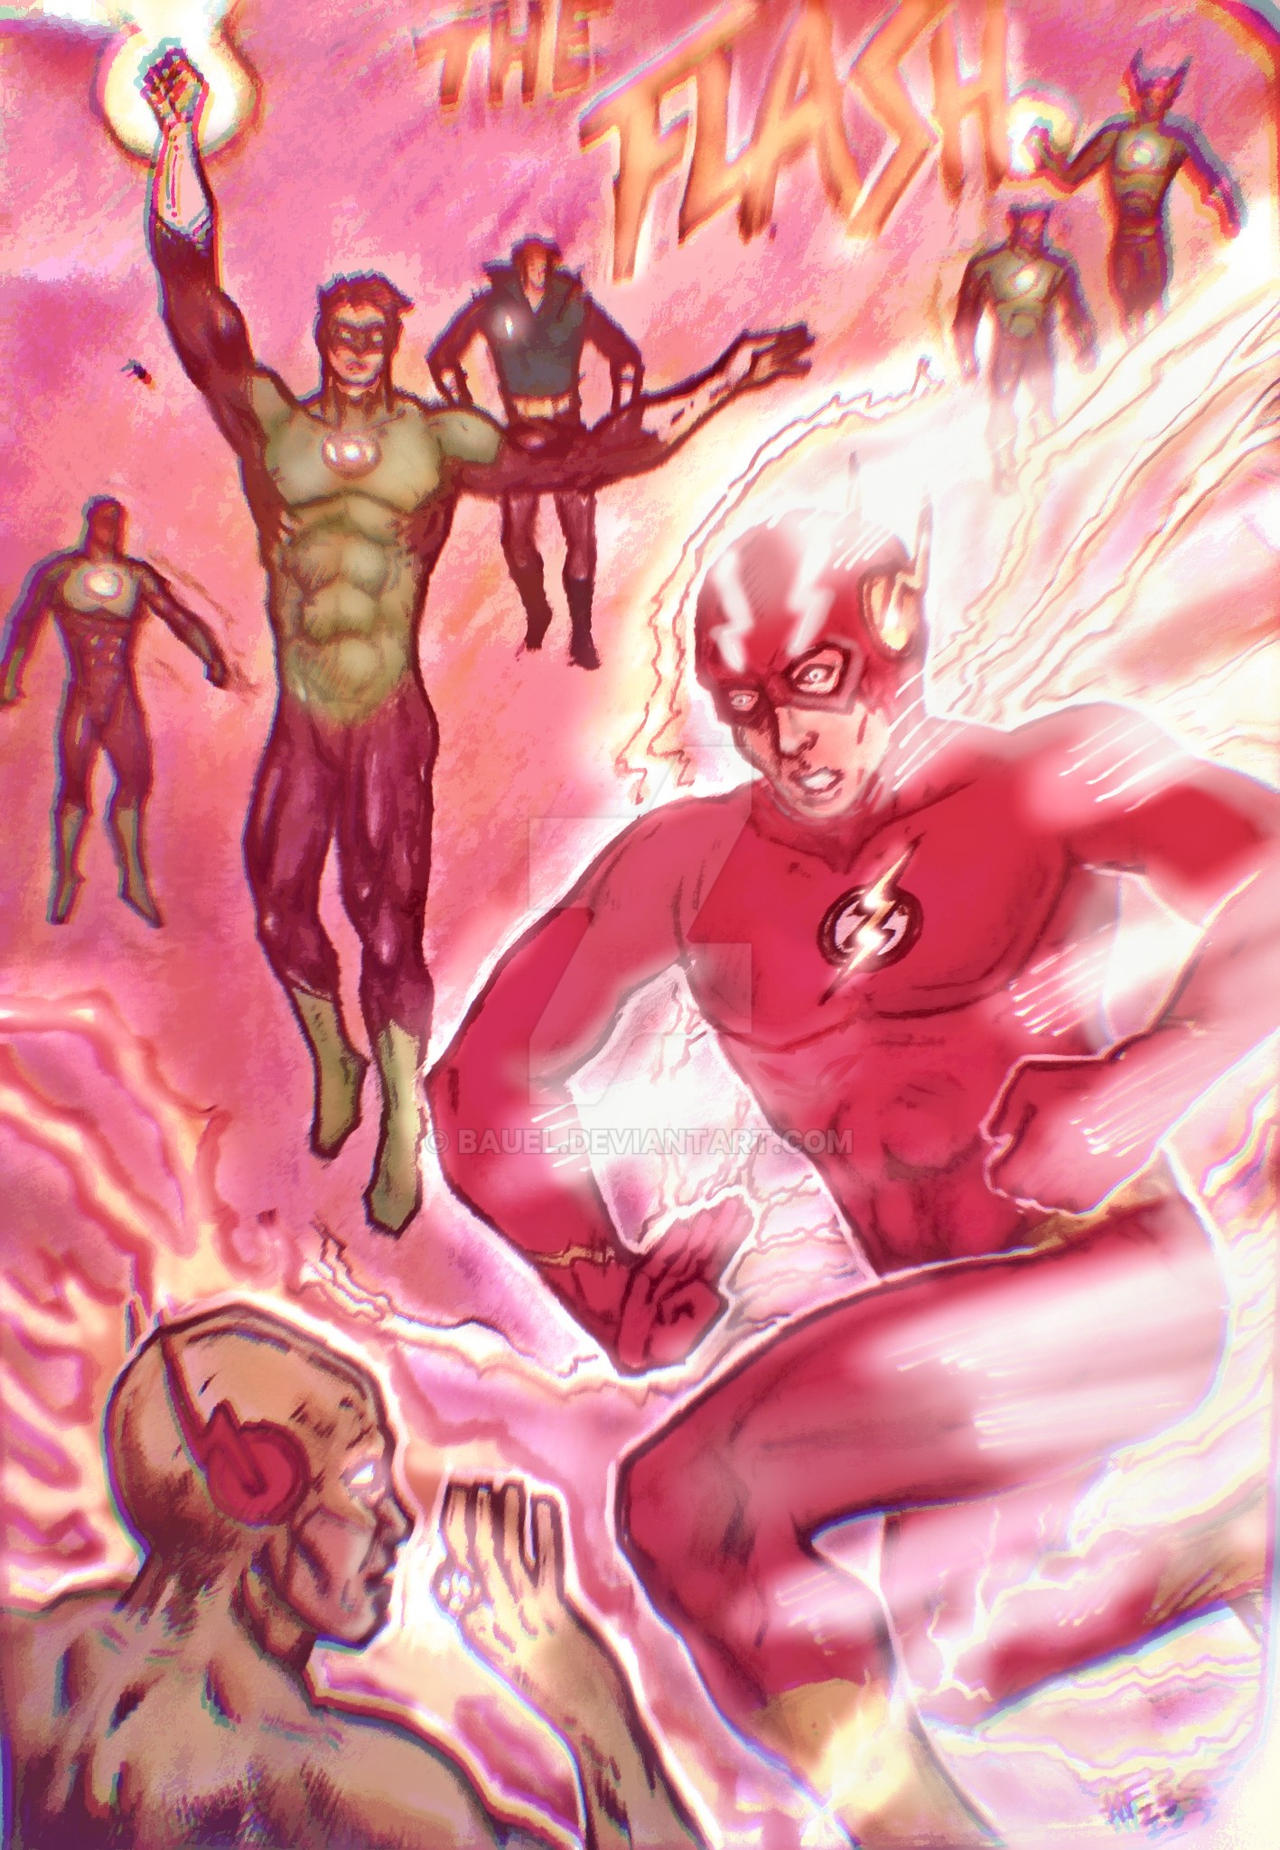 Zoom From The Flash Series Finale by TytorTheBarbarian on DeviantArt